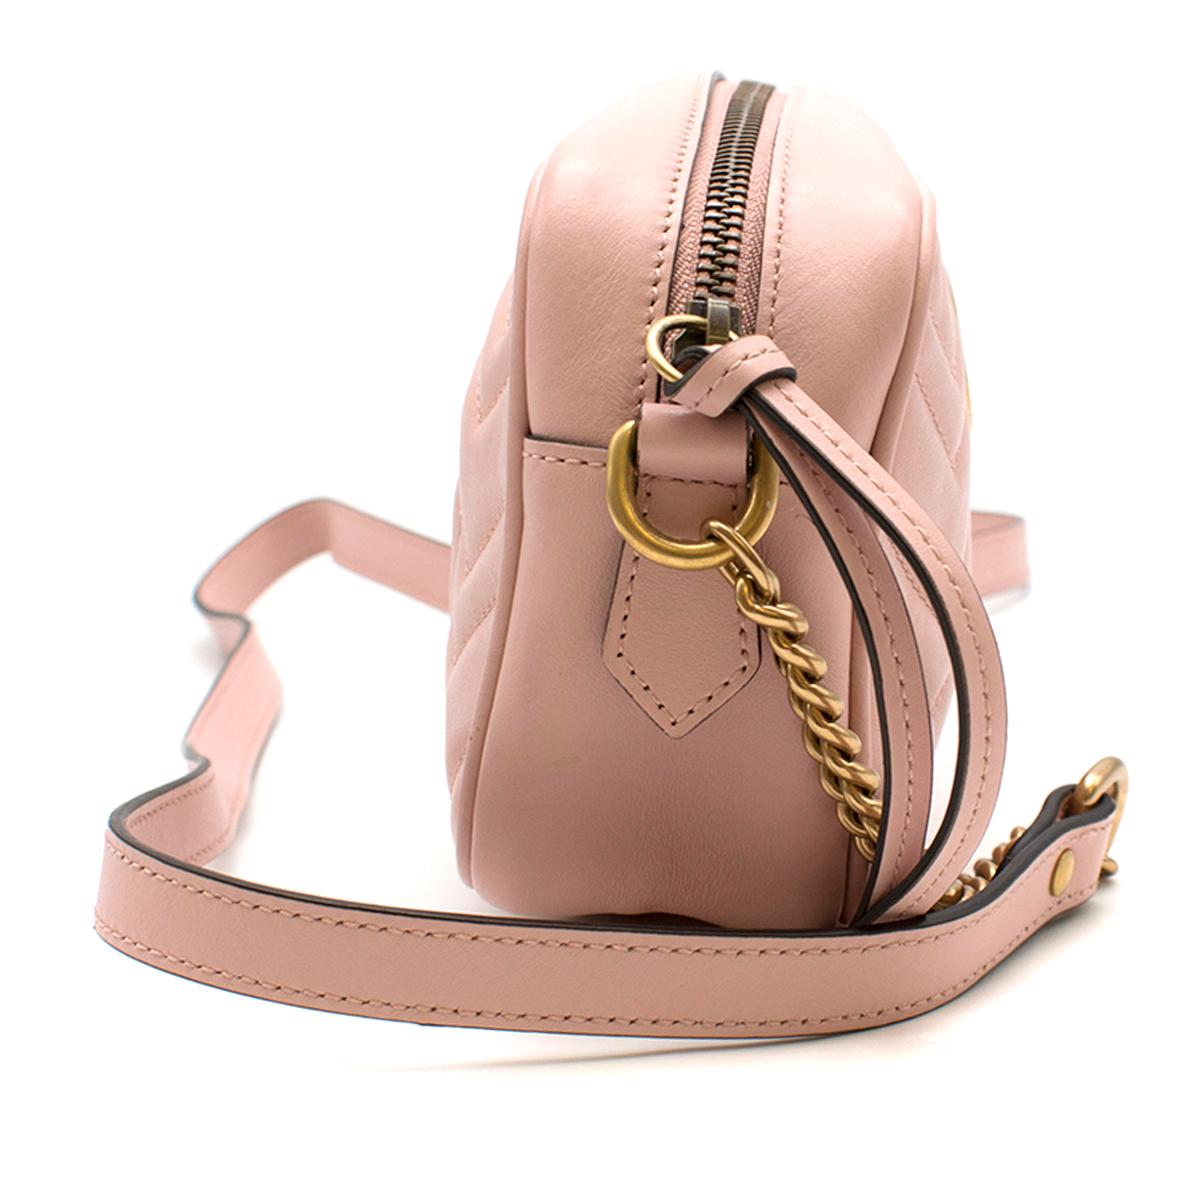 Gucci Marmont Baby Pink Matelasse Mini Camera Bag

-Baby pink, 100% leather 
-Antique gold-toned hardware
-Zip closure 
-GG embellishment
-Interior zip pocket
-Grey suede interior 

Please note, these items are pre-owned and may show some signs of